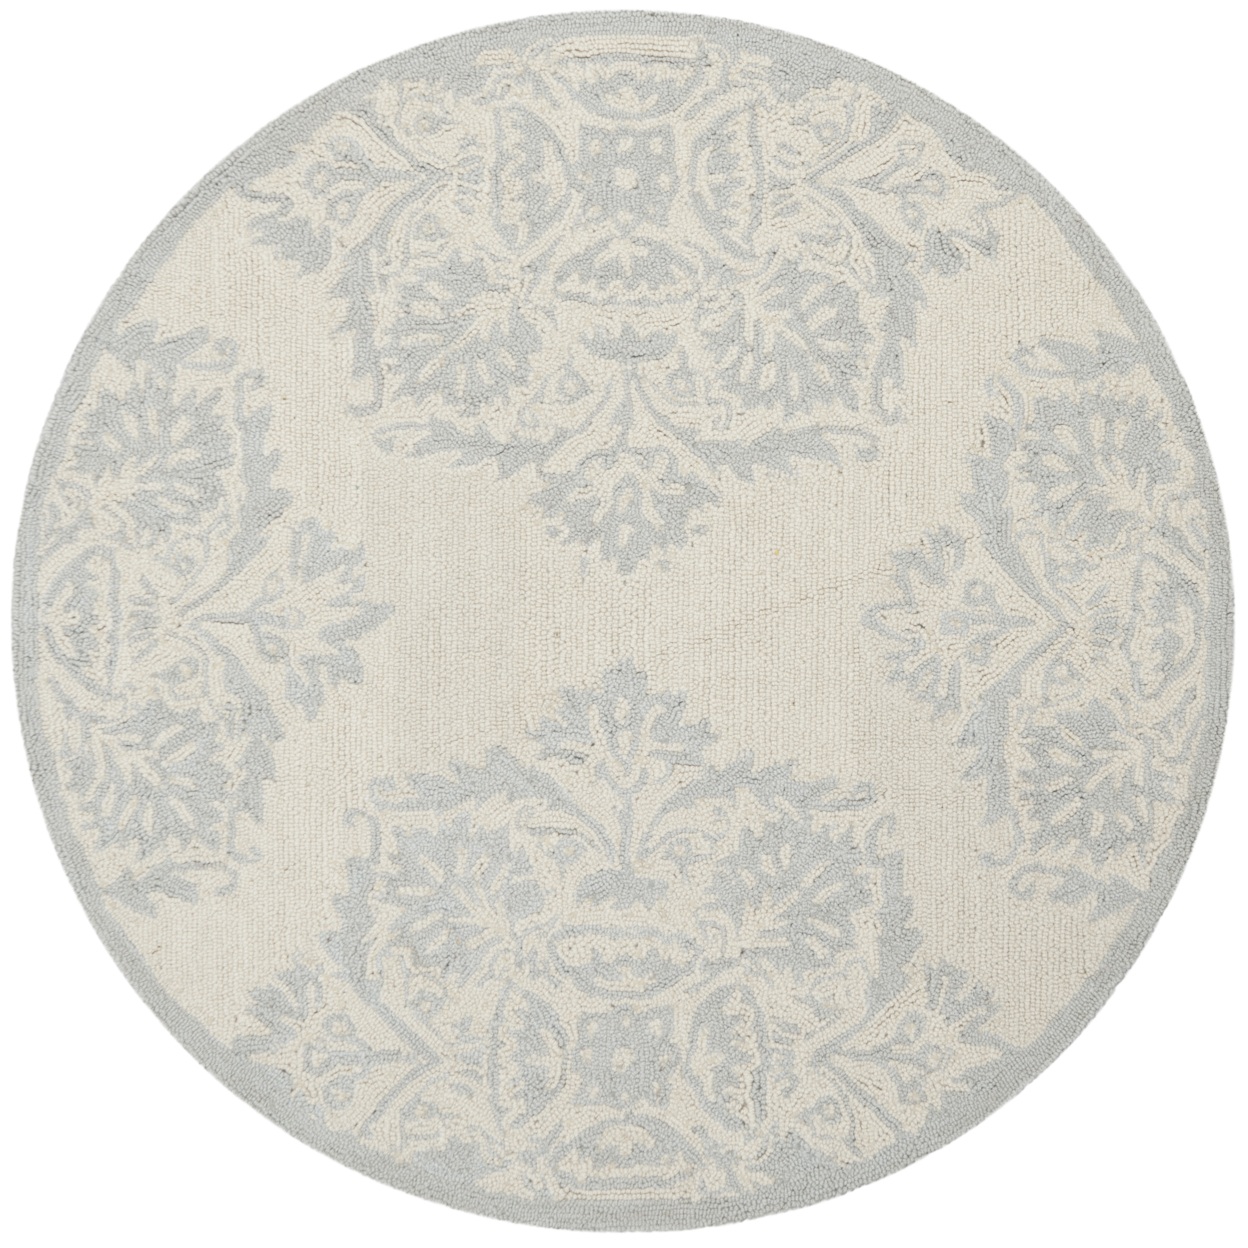 SAFAVIEH Chelsea HK359A Hand-hooked Ivory / Blue Rug - 3' Round